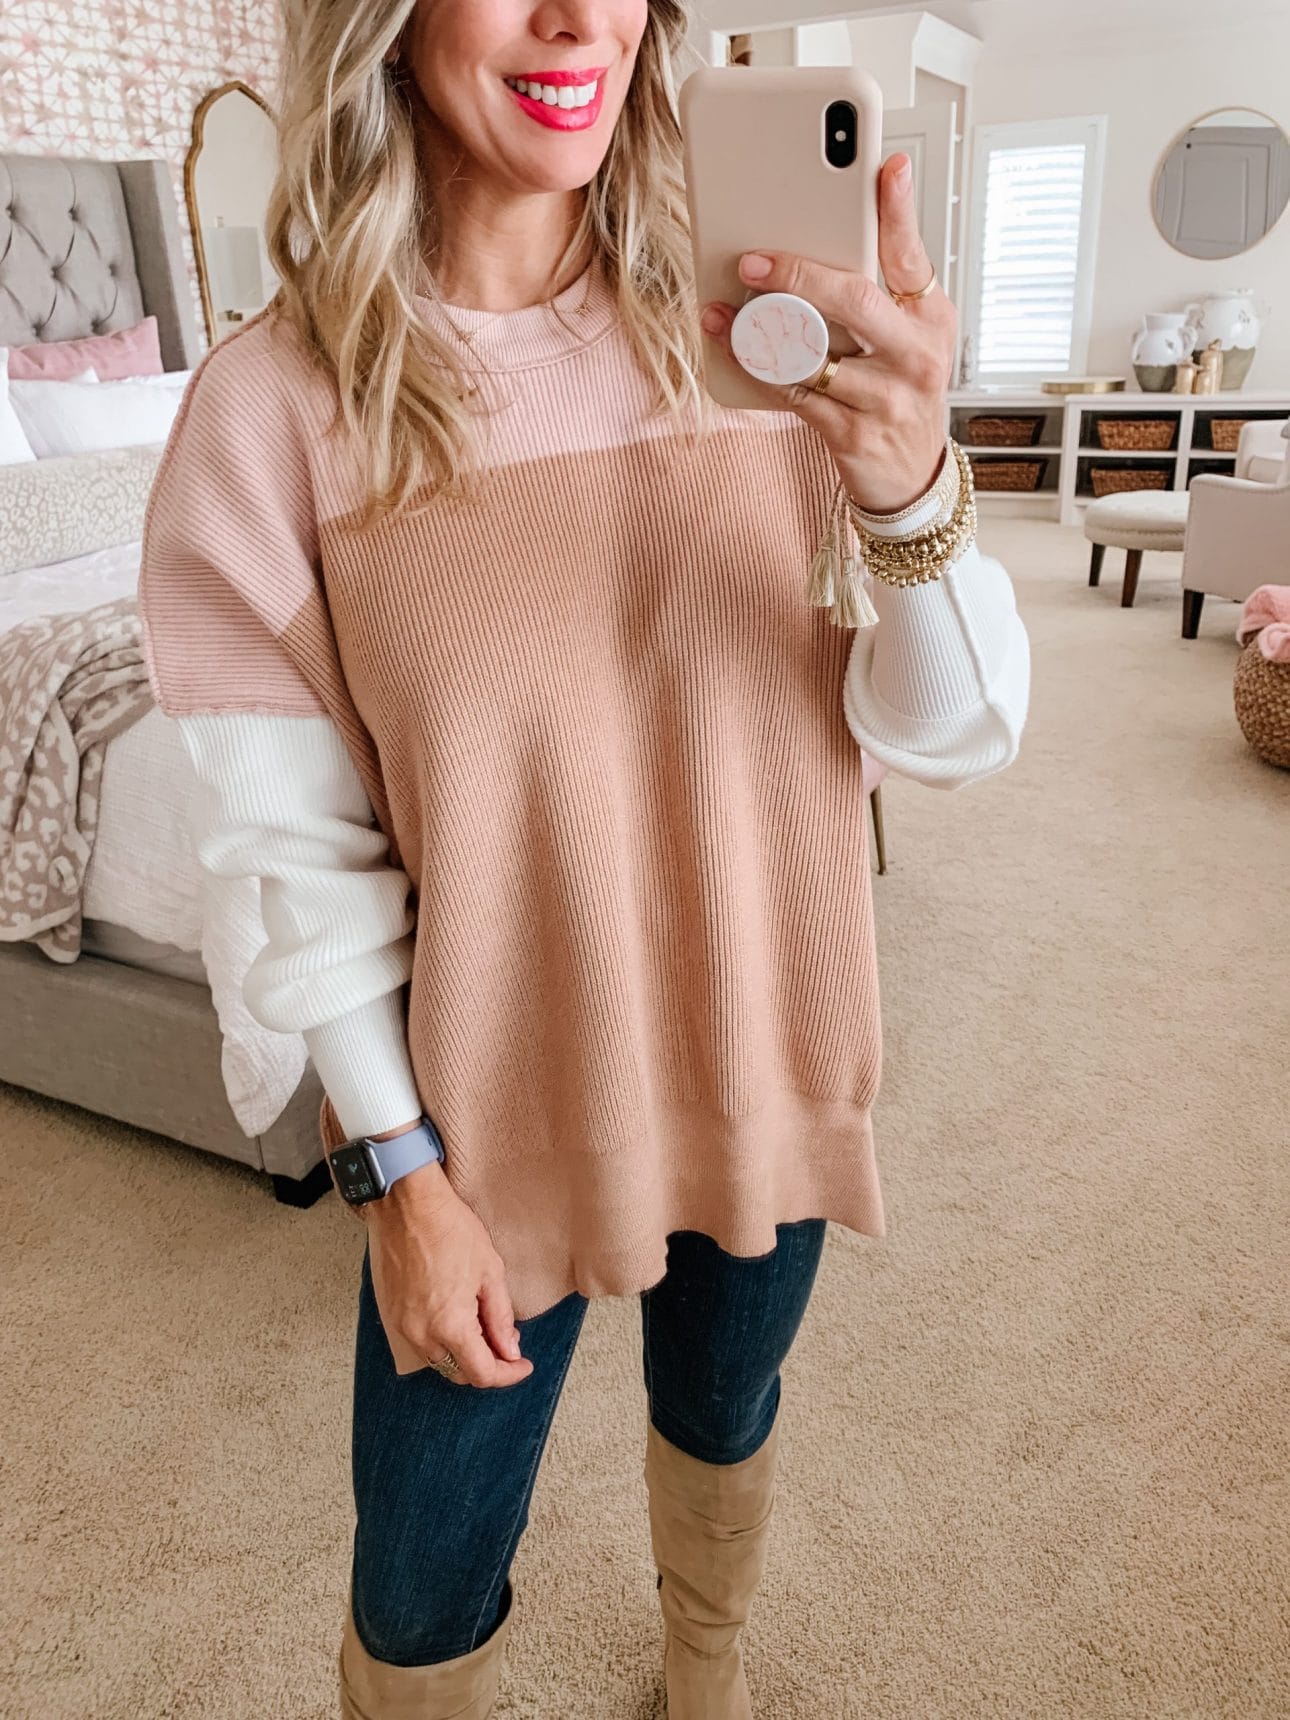 Amazon Fashion, Colorblock Sweater, Jeans, Booties 